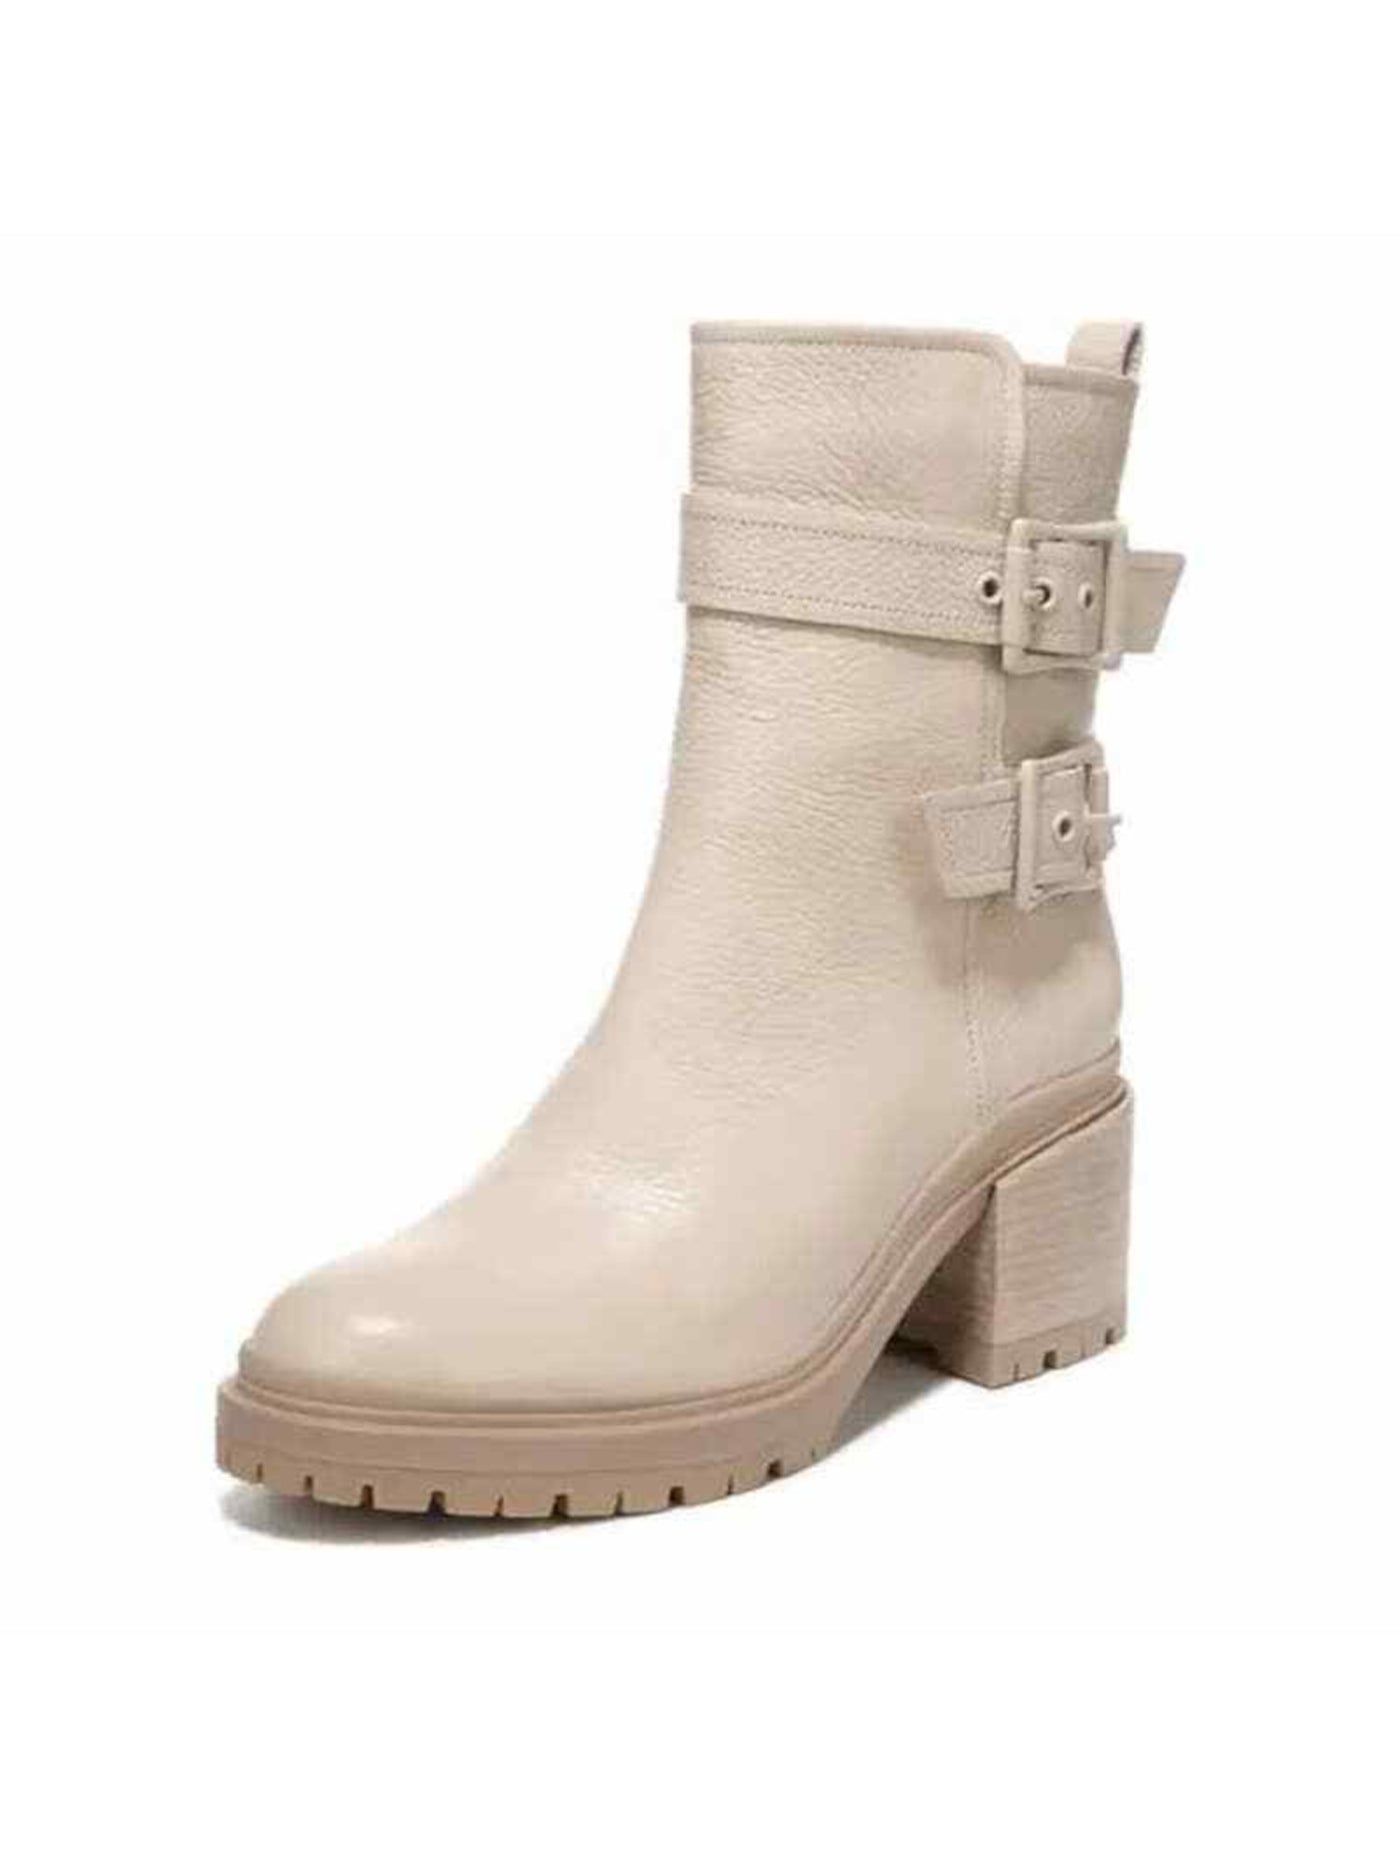 NATURALIZER Womens Beige Buckle Accent Trina Round Toe Block Heel Zip-Up Leather Heeled Boots 8.5 M